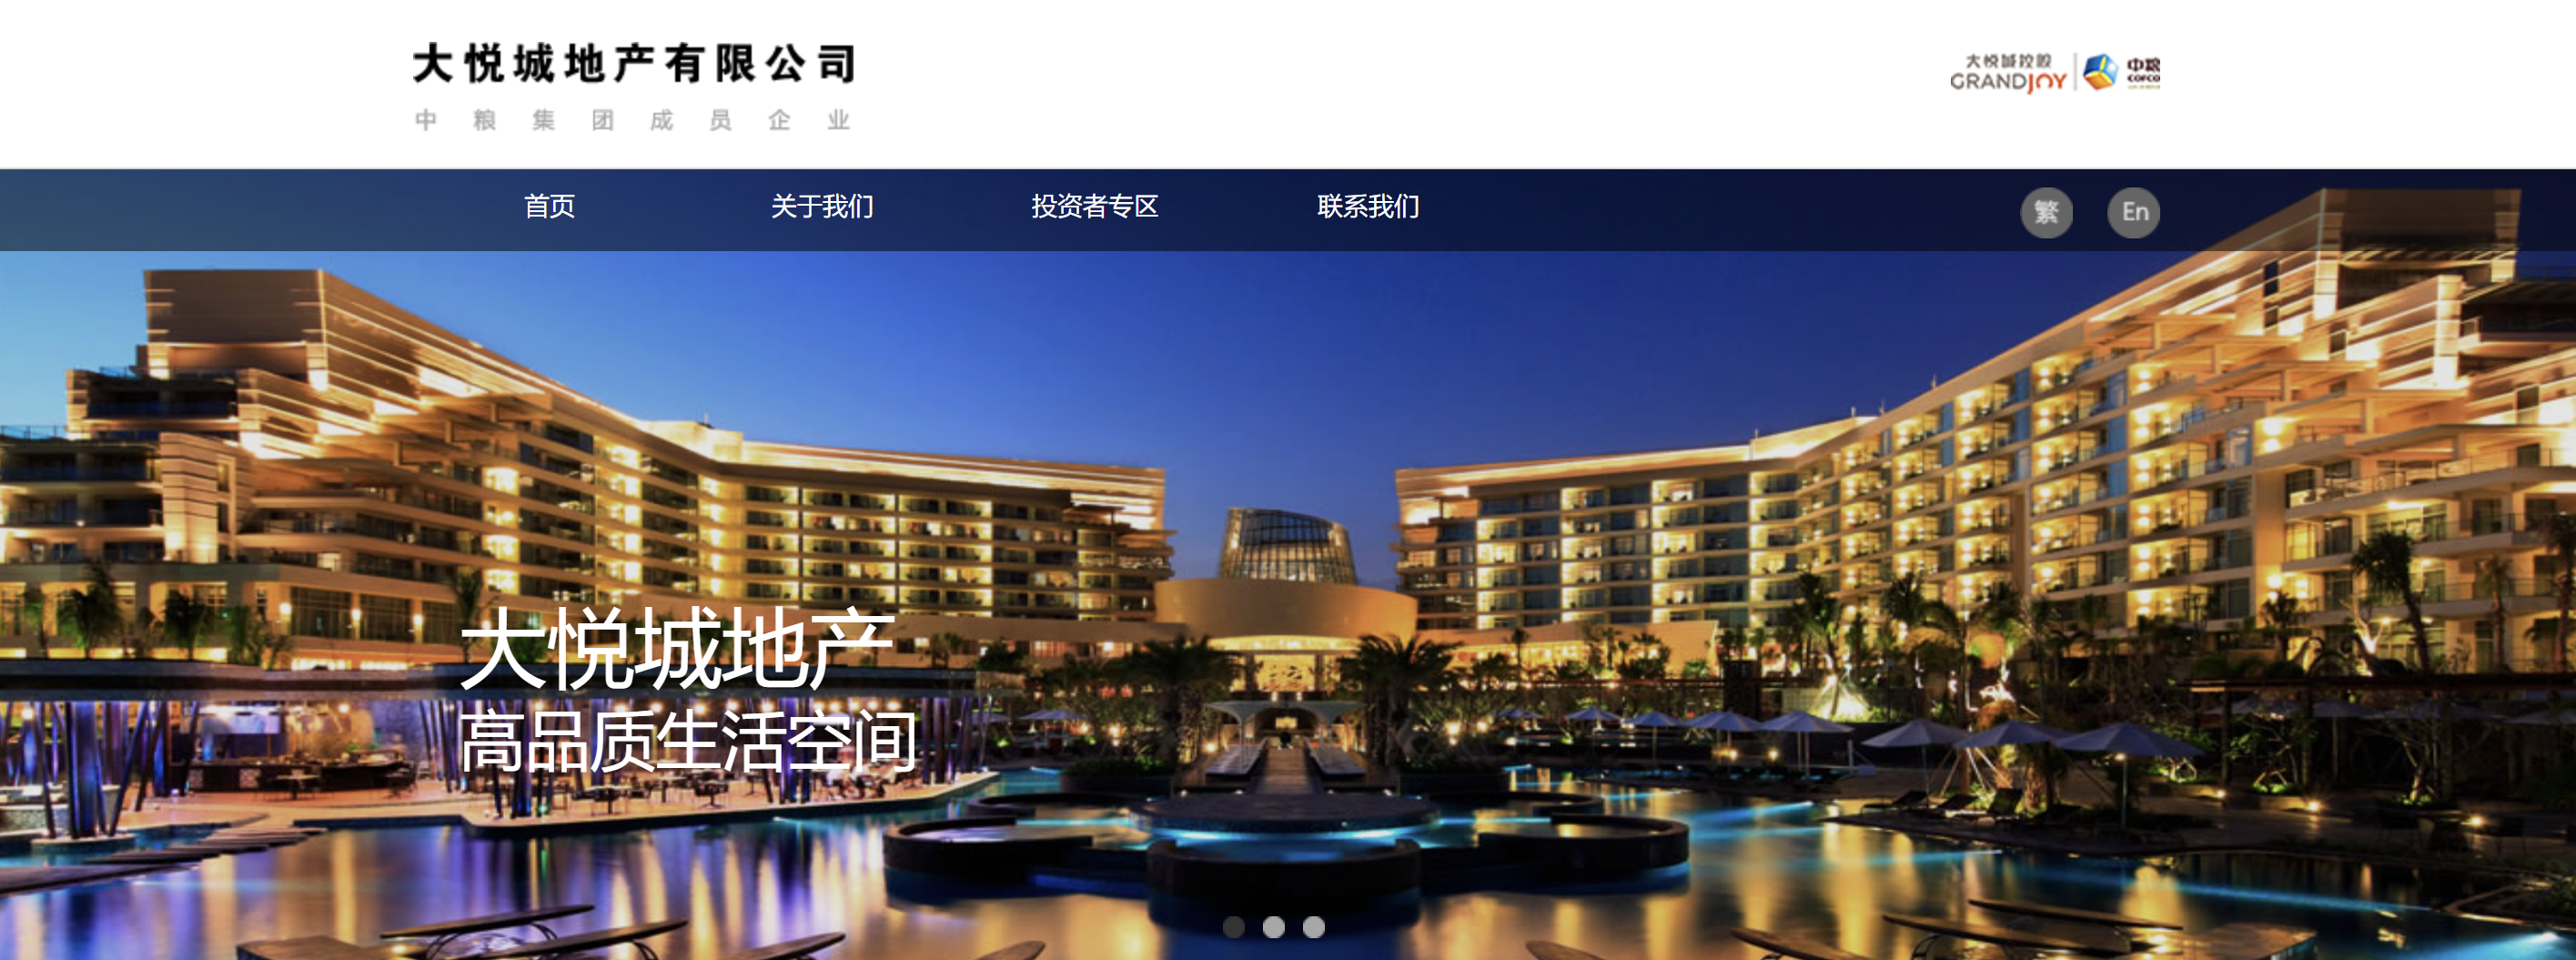 Joy City Property Semi-Annual Report: Average Room Revenue Doubles for Beijing Waldorf Astoria and Two Luxury Hotels in Sanya